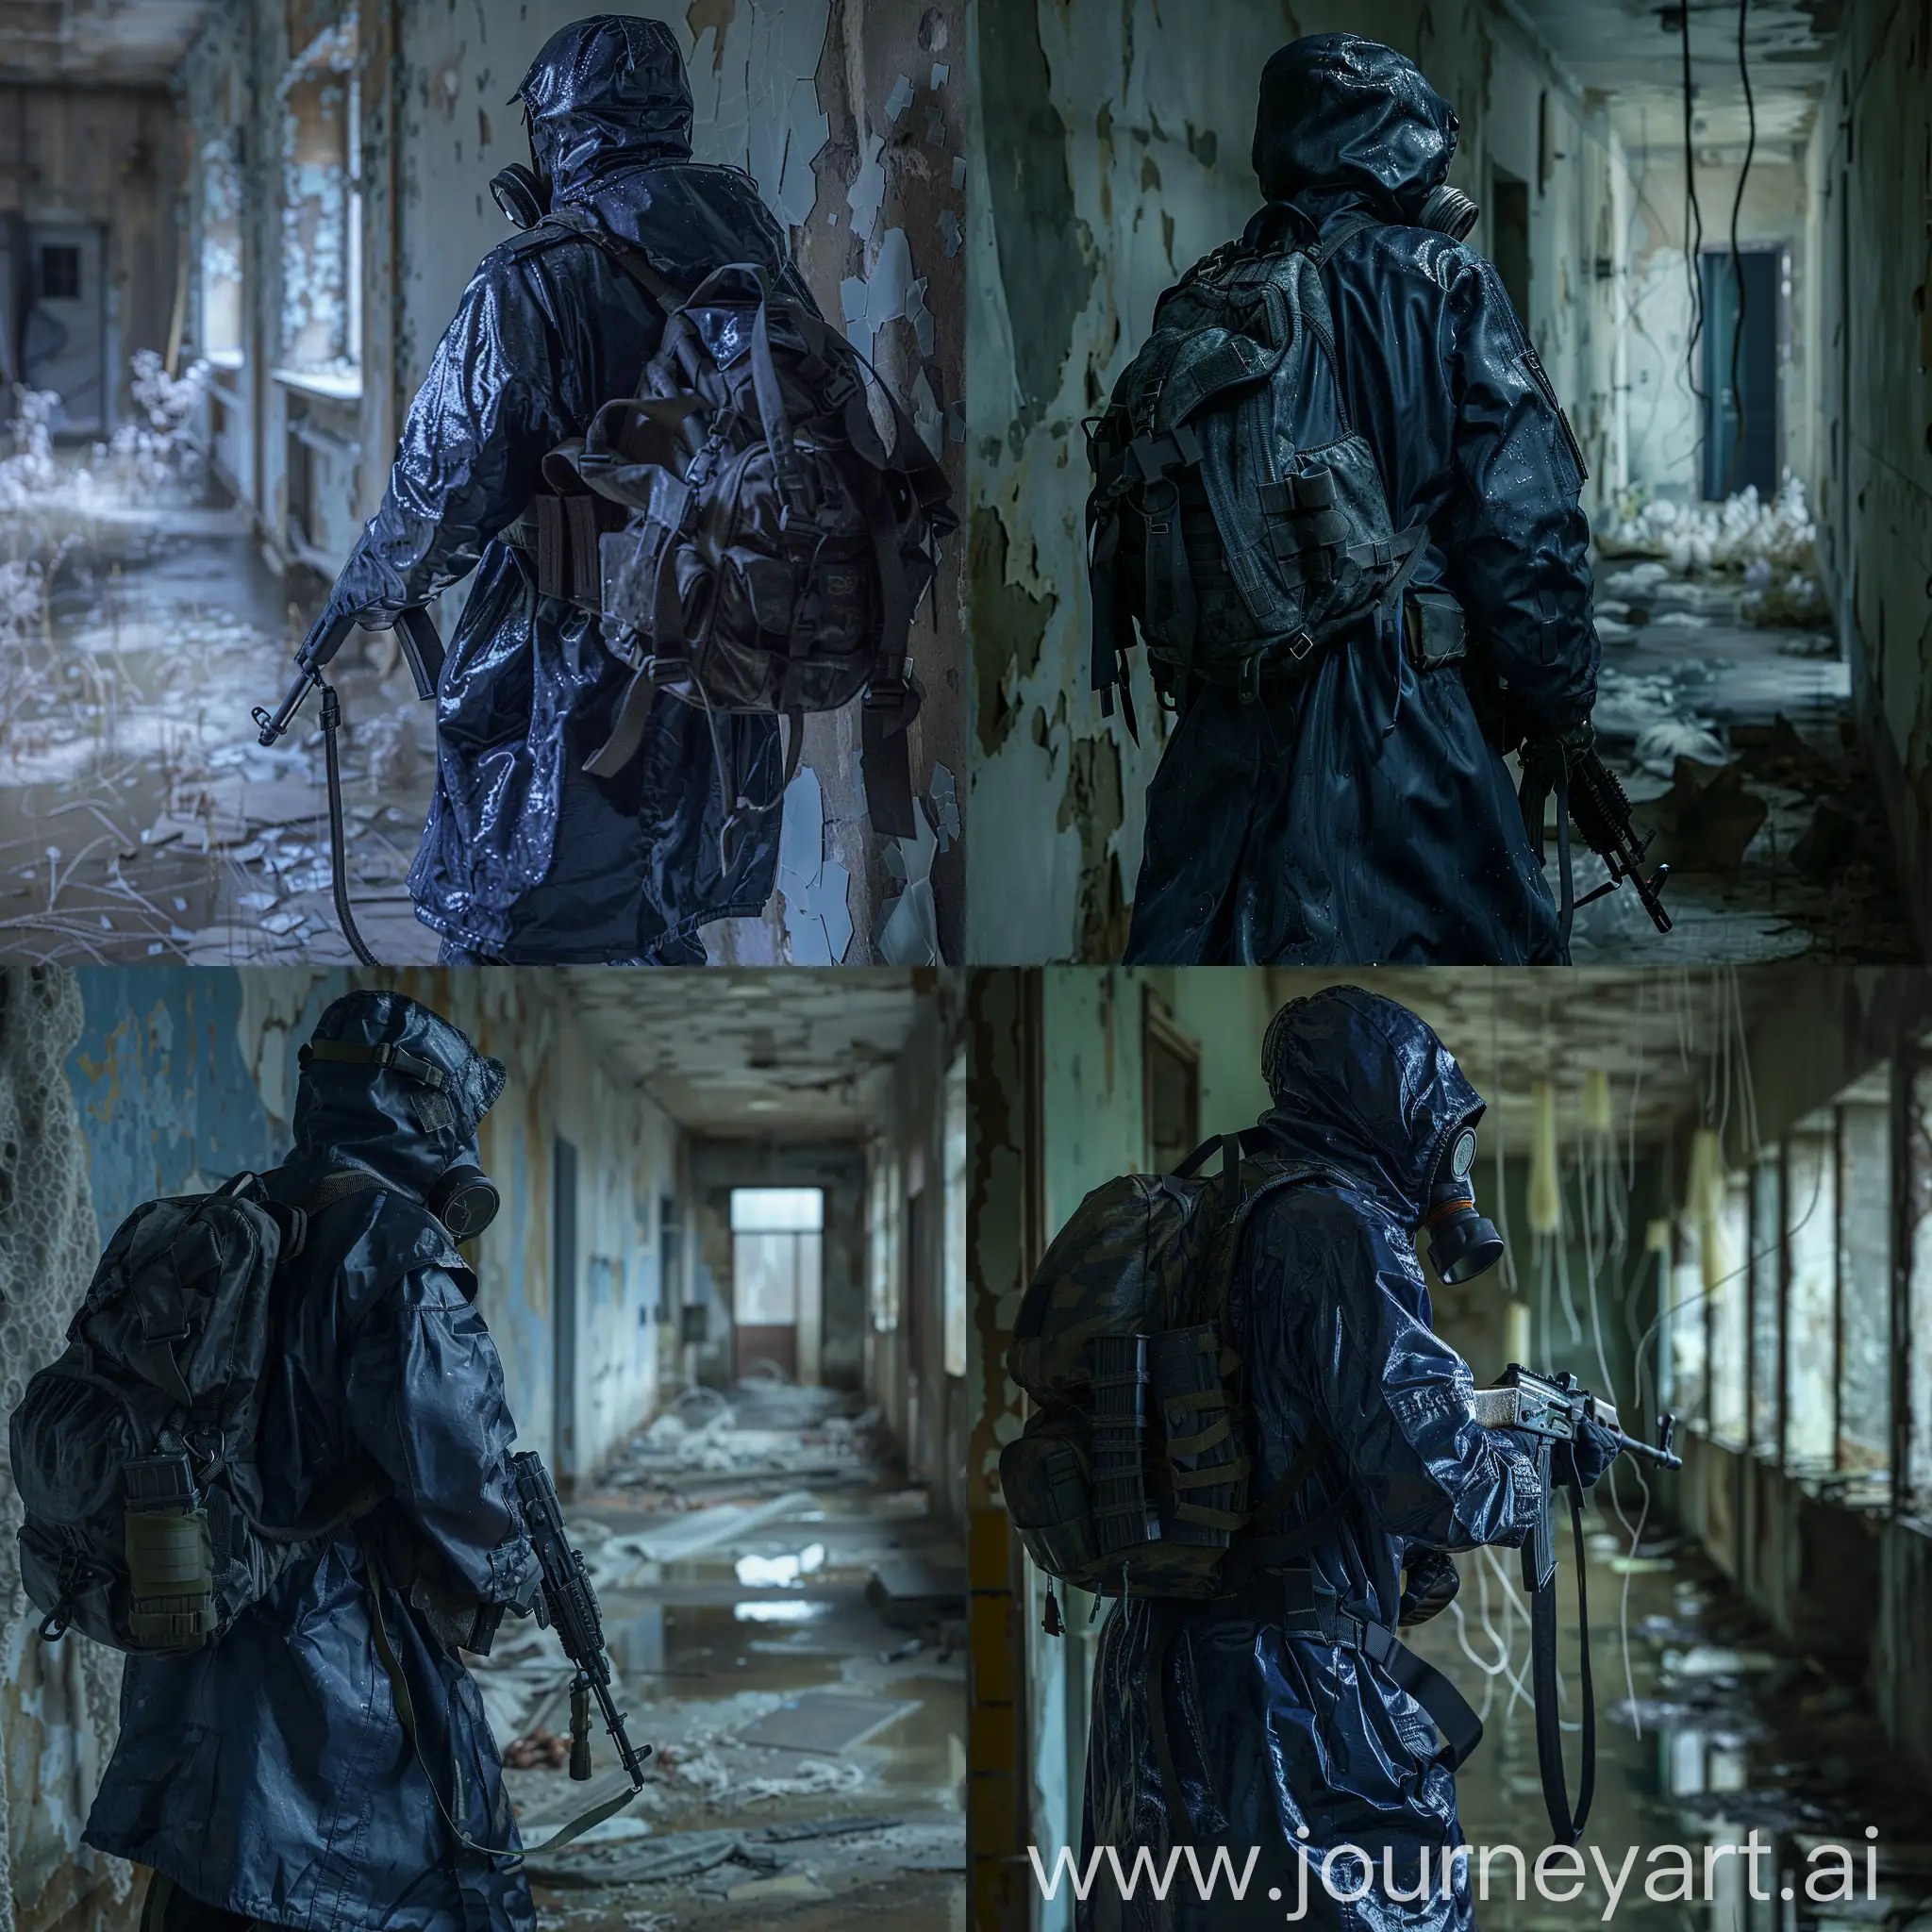 The universe of a S.T.A.L.K.E.R., a mercenary in a dark blue military raincoat, in military unloading, with a backpack on his back, a gas mask on the mercenary's face, a sniper rifle in his hands, a mercenary walks along the corridor of an abandoned building in Pripyat, dangerous radiation fluff hangs from the wall, a gloomy atmosphere.